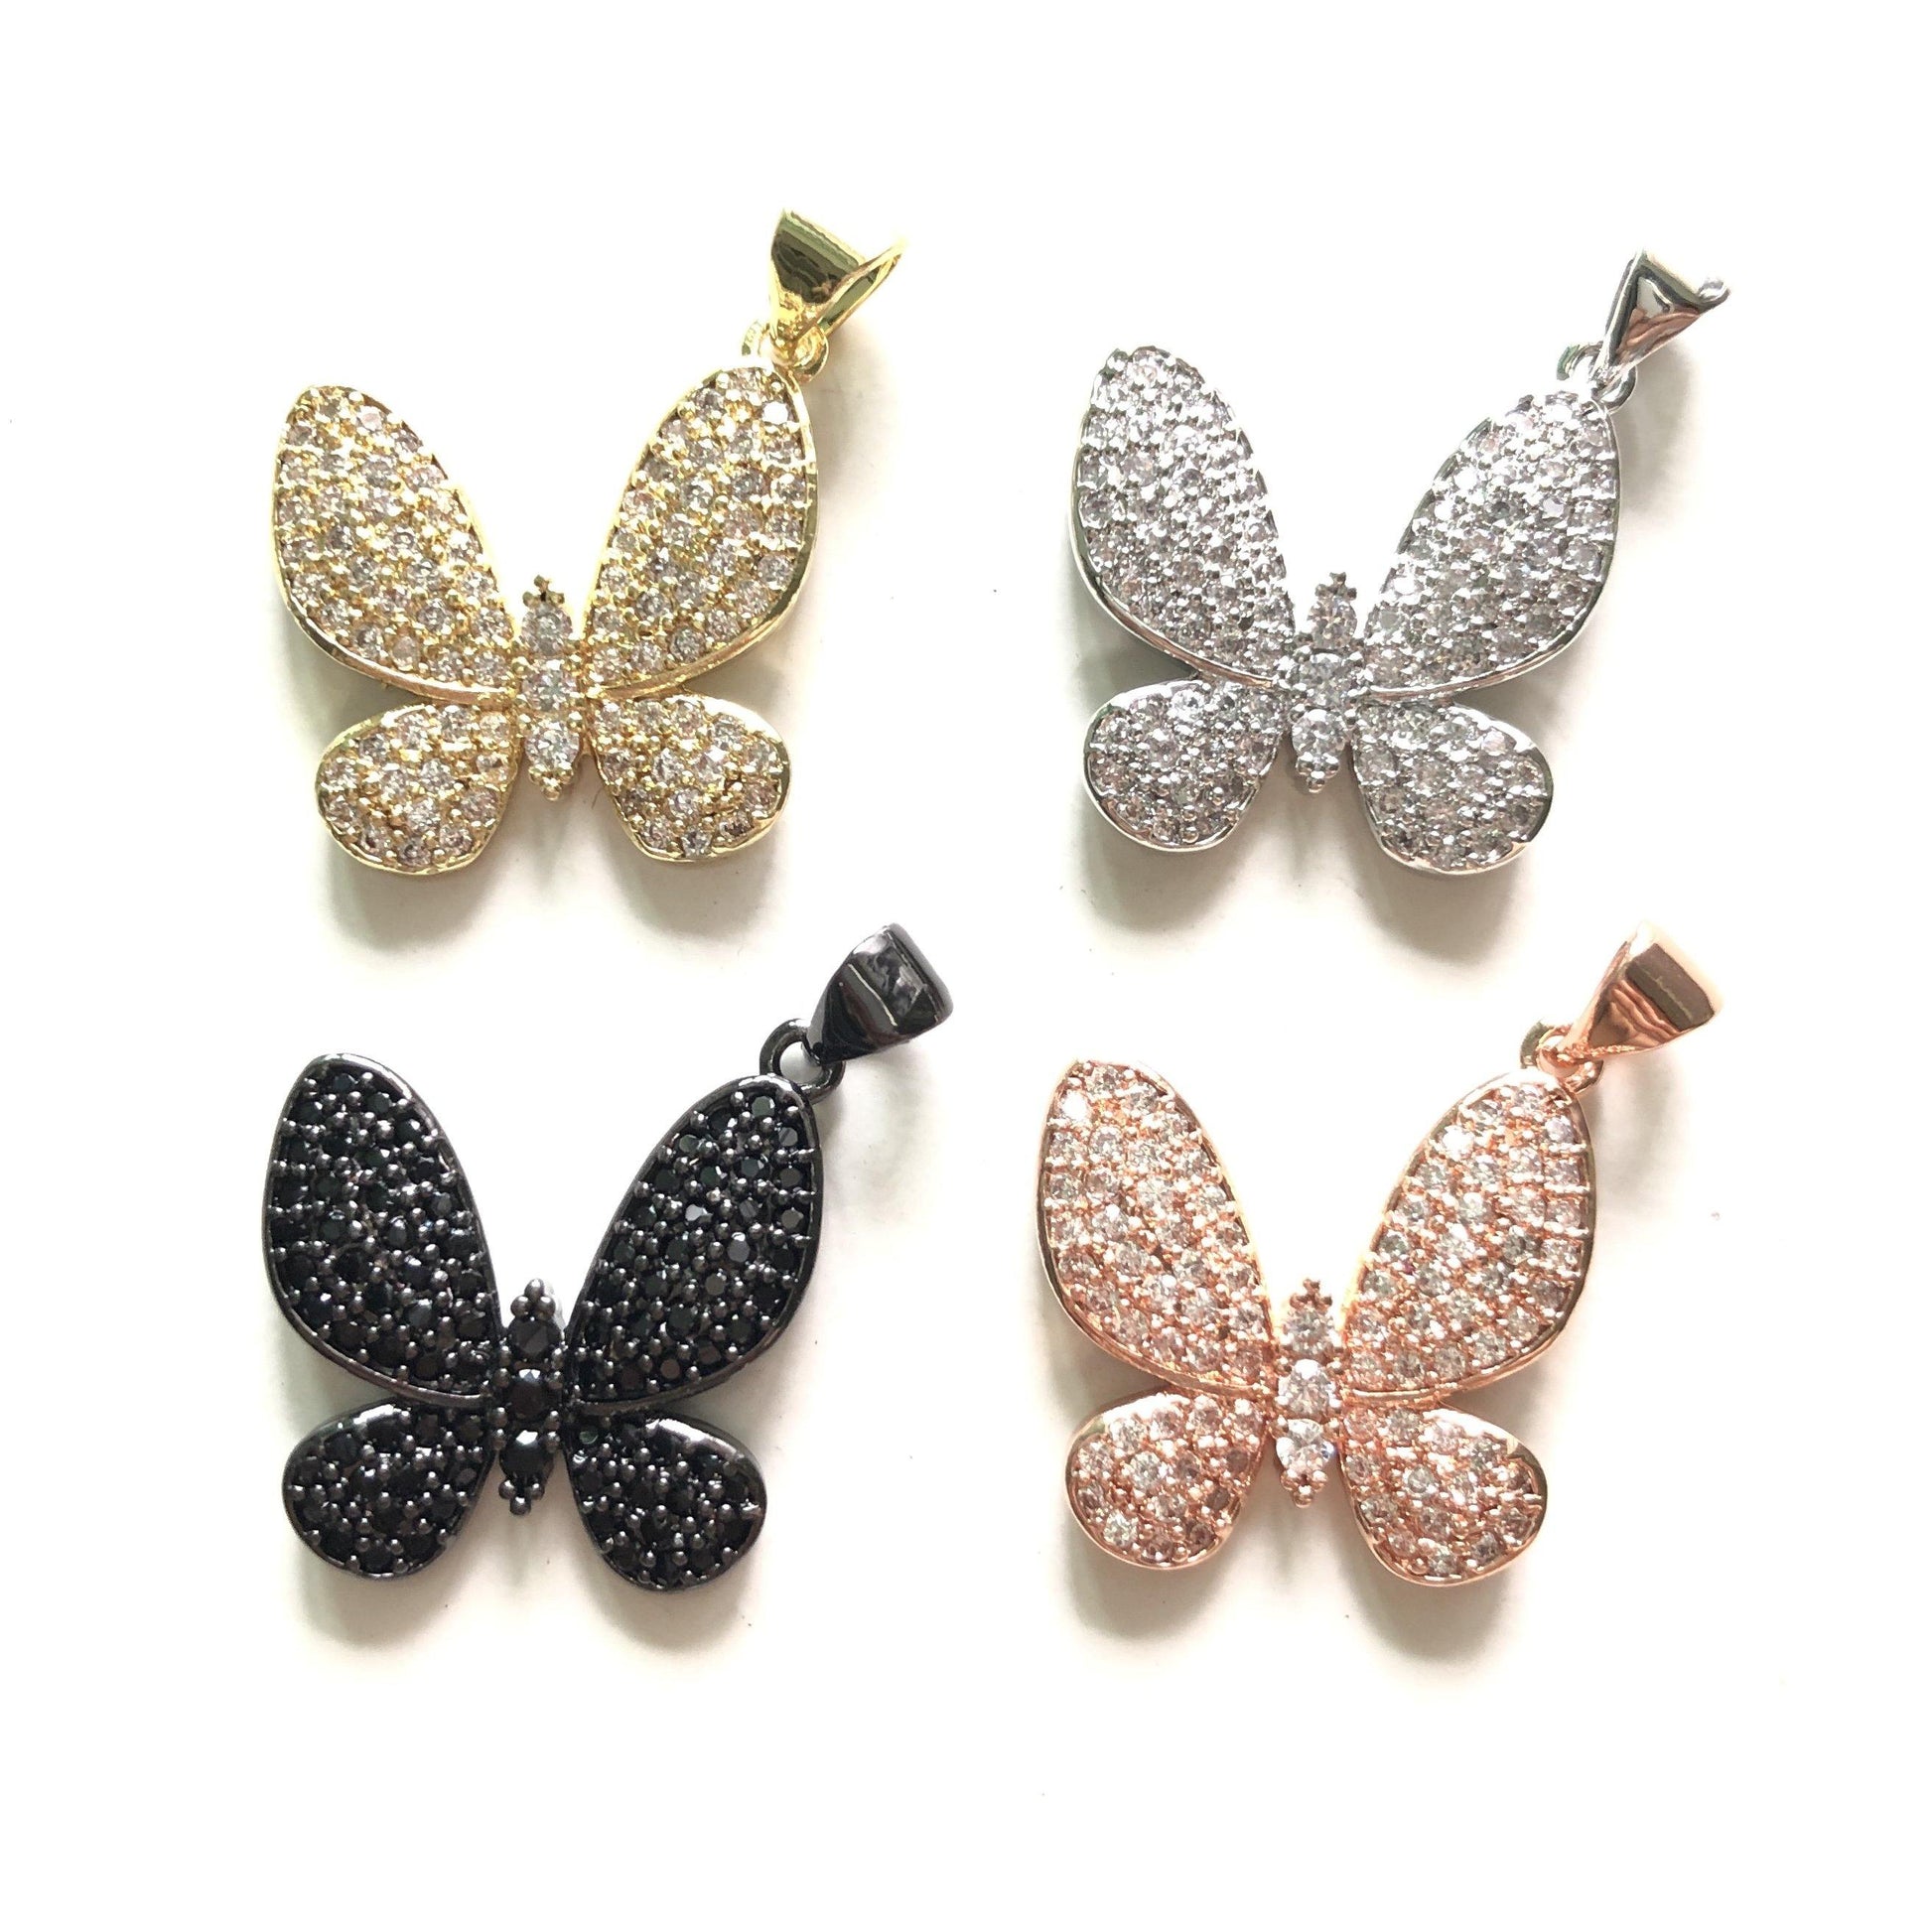 10pcs/lot 20*20mm CZ Paved Butterfly Charms CZ Paved Charms Butterflies Charms Beads Beyond